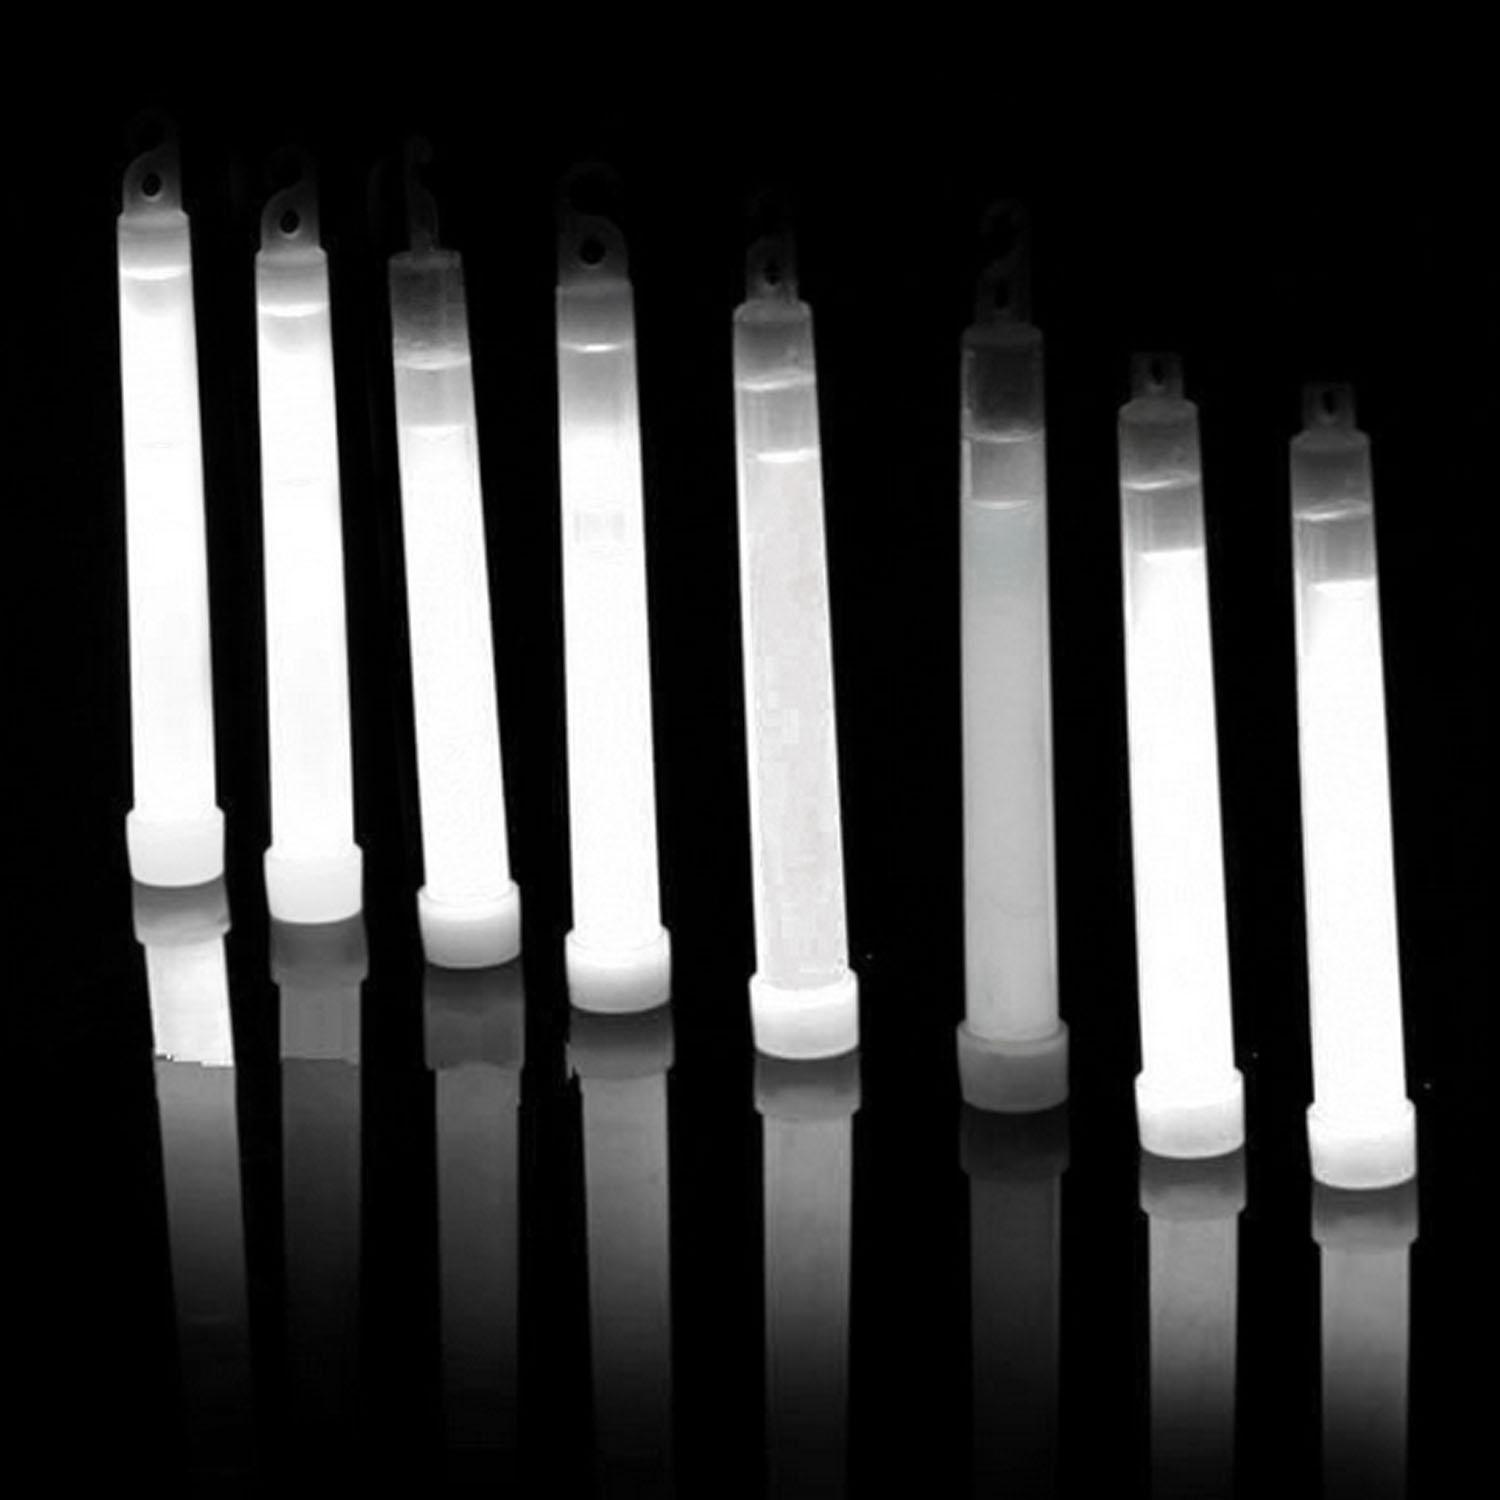 12PCS Glow Sticks Snaplights Bright Toy Decoration for Singing Concert Birthday Party Camping White - intl